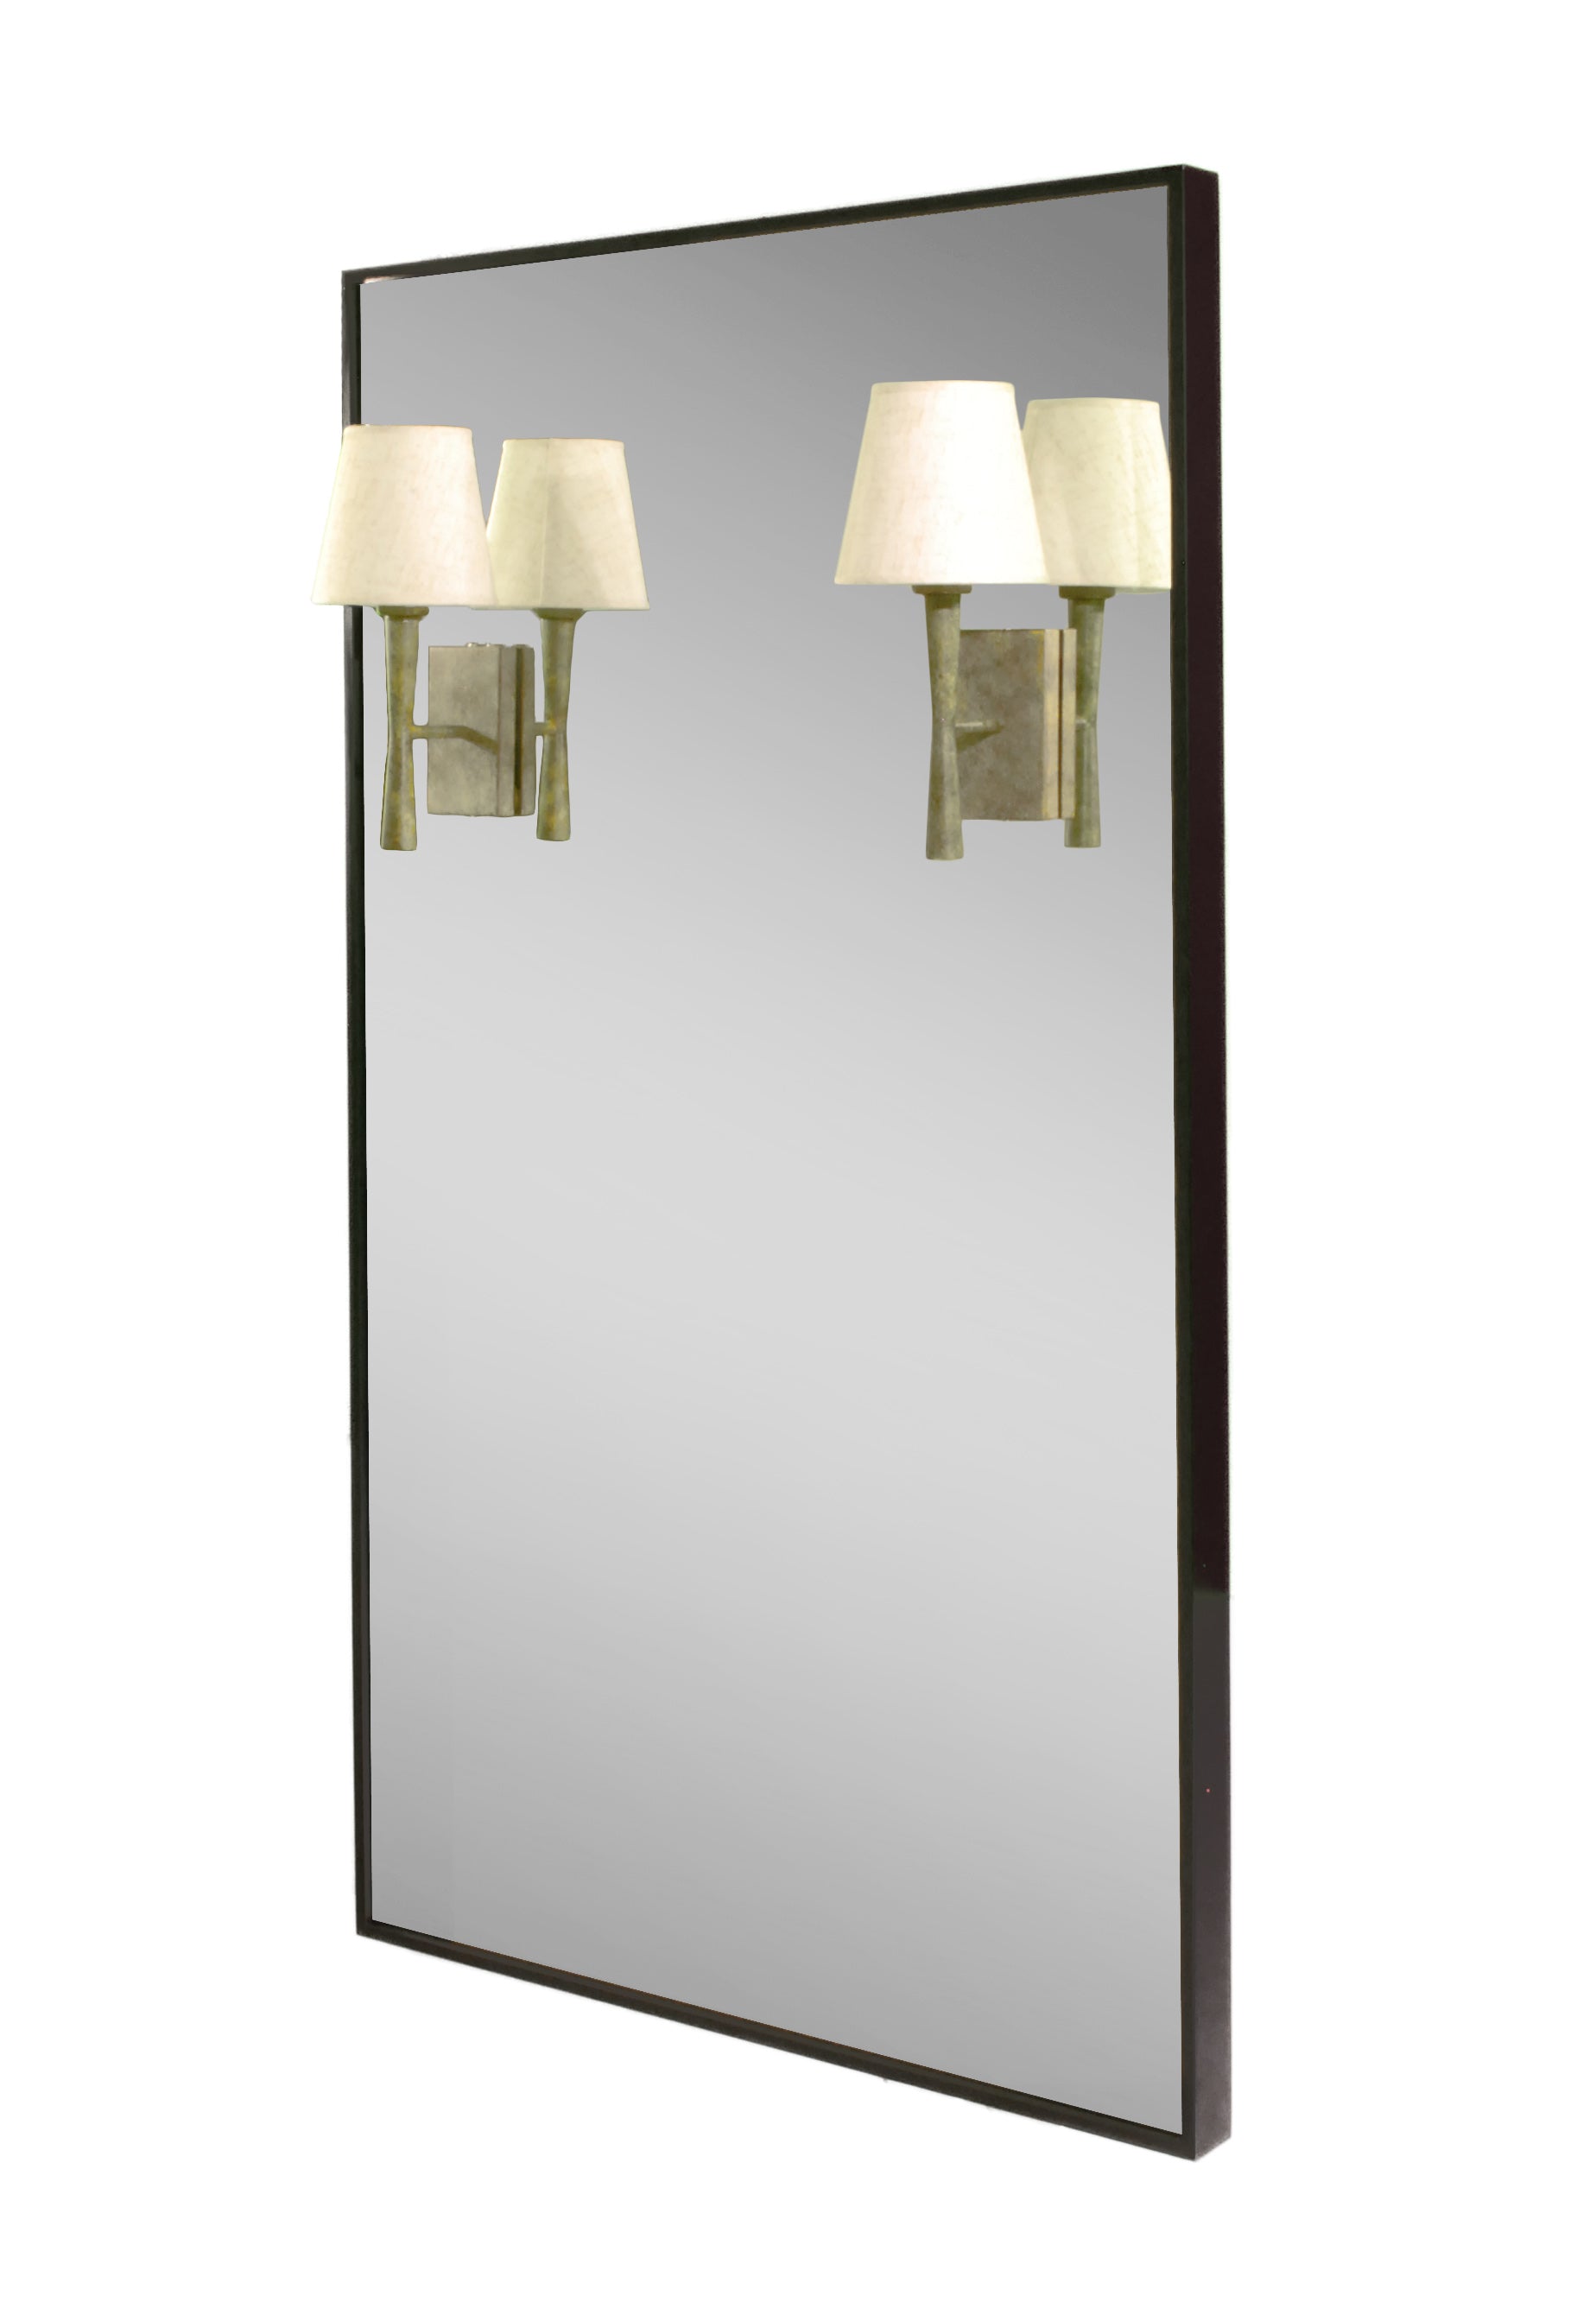 Mirror with sconces